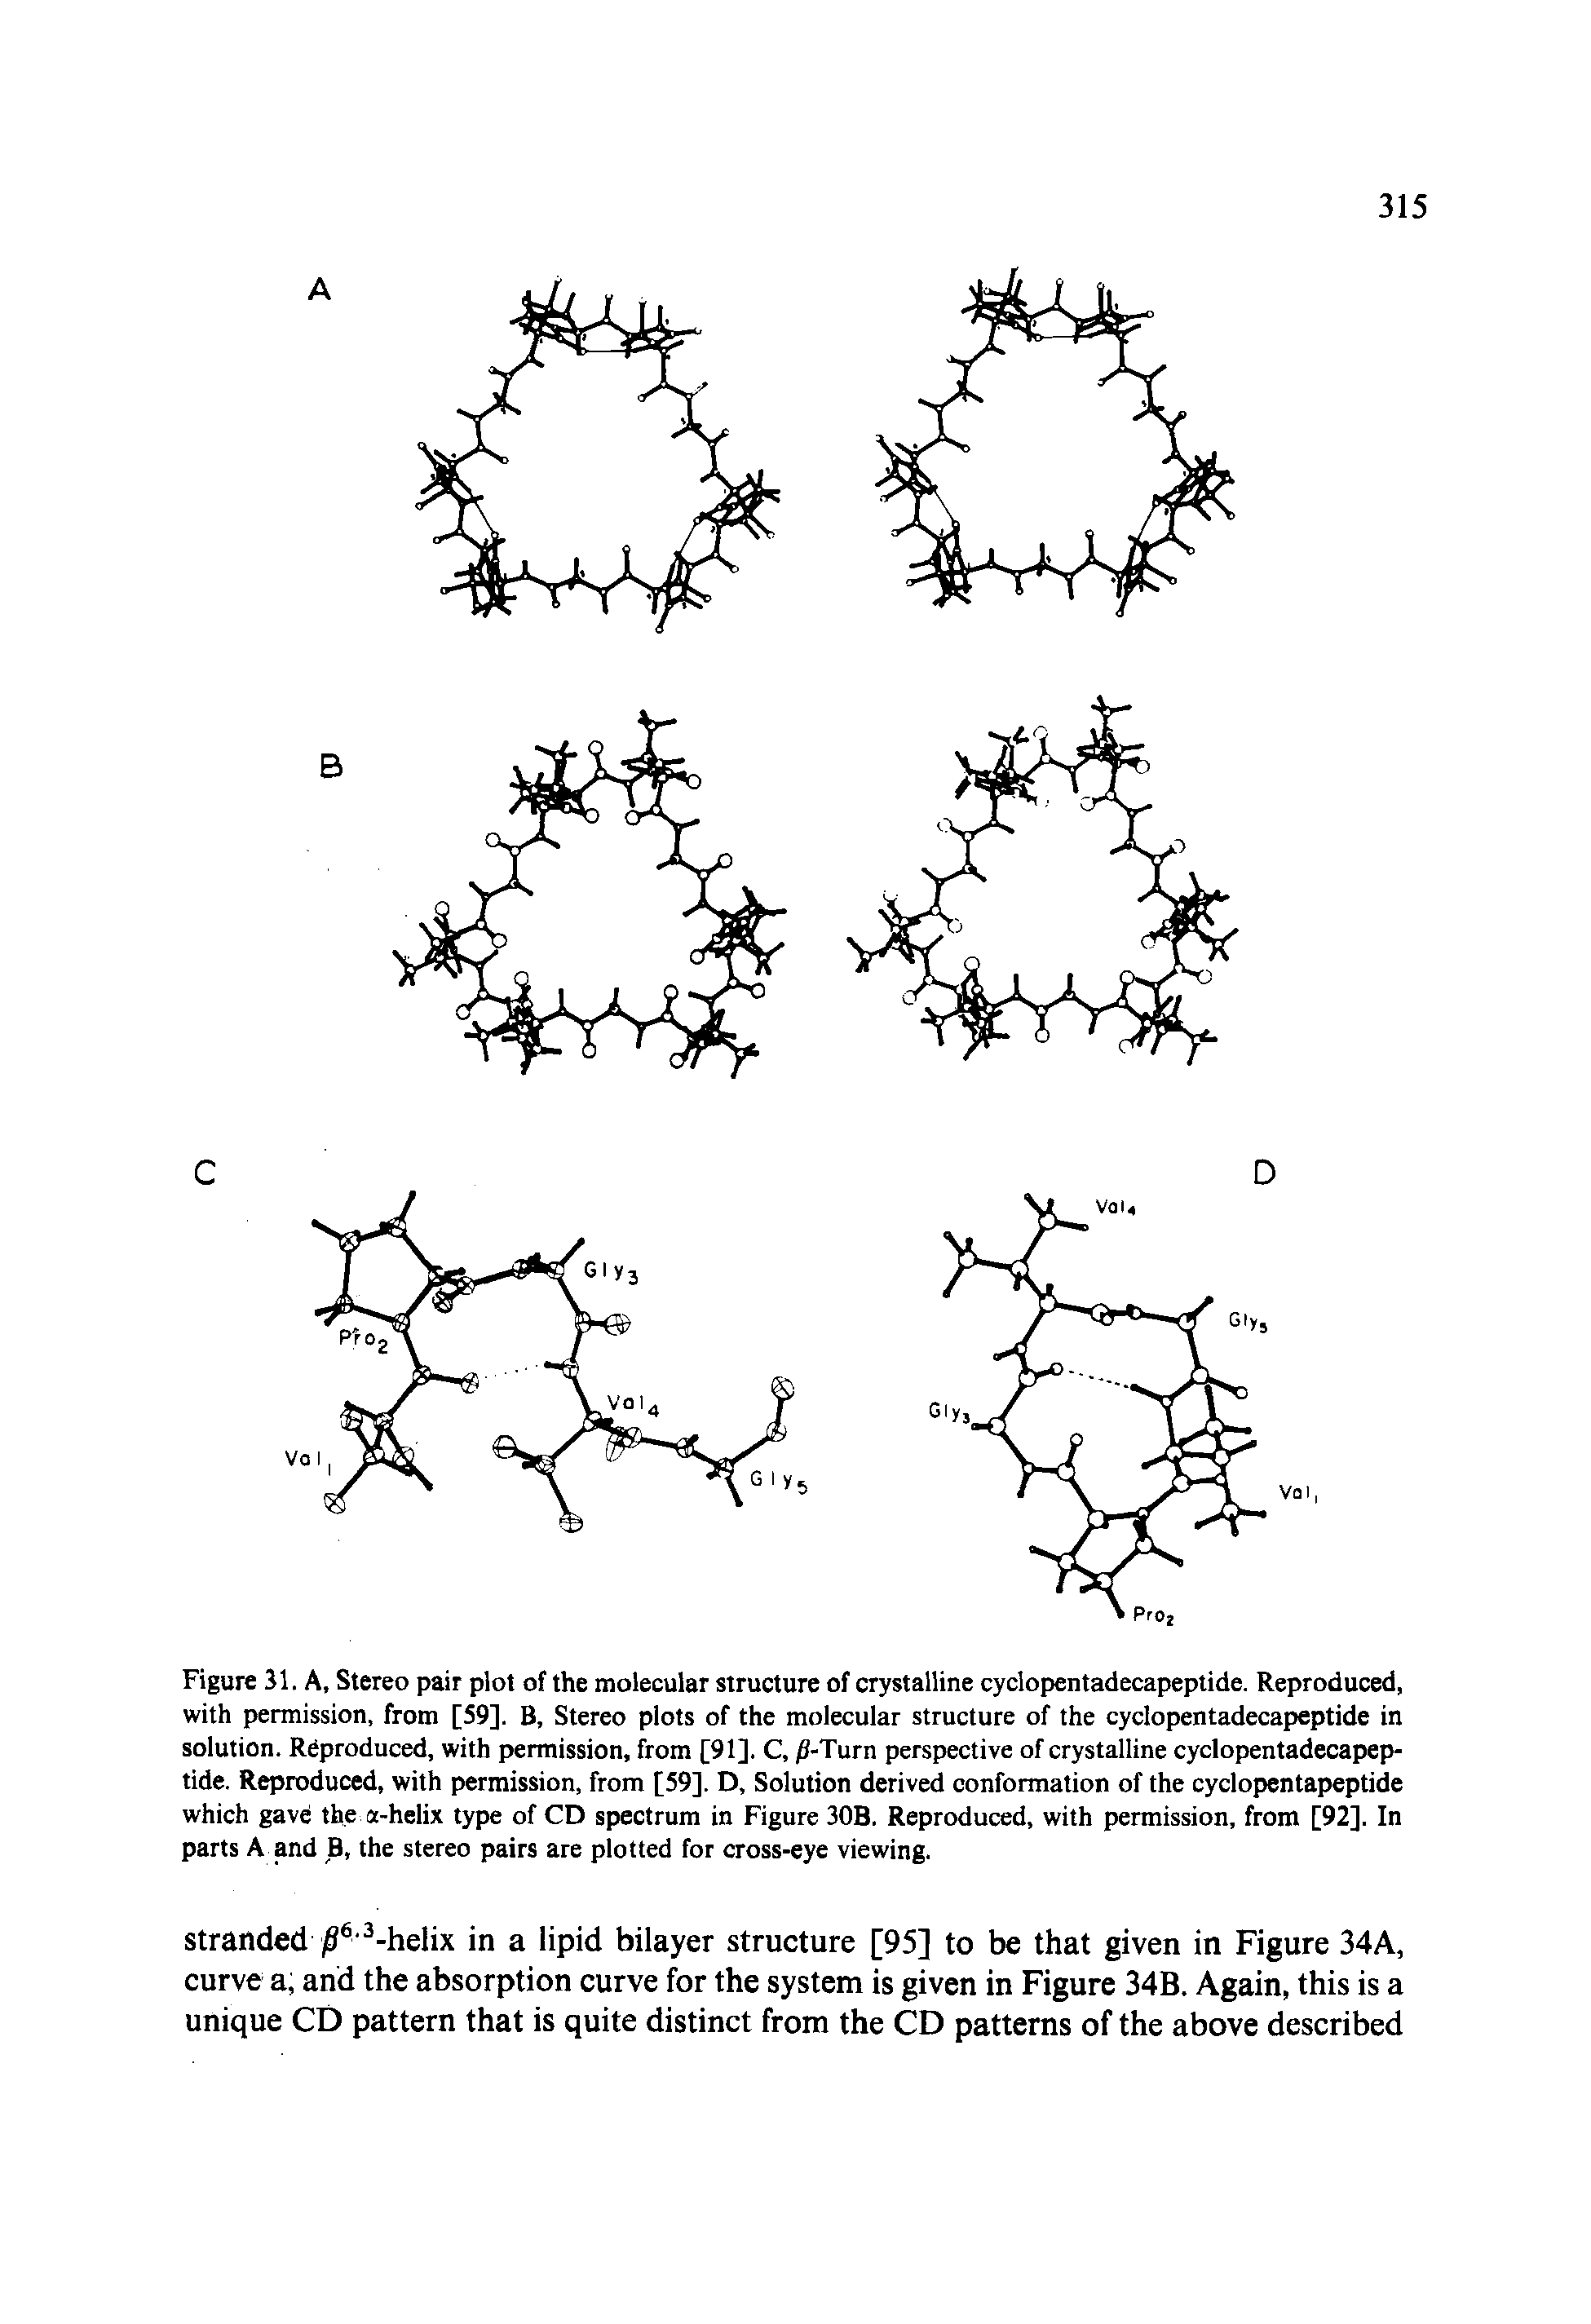 Figure 31. A, Stereo pair plot of the molecular structure of crystalline cyclopentadecapeptide. Reproduced, with permission, from [59]. B, Stereo plots of the molecular structure of the cyclopentadecapeptide in solution. Reproduced, with permission, from [91]. C, -Turn perspective of crystalline cyclopentadecapeptide. Reproduced, with permission, from [59]. D, Solution derived conformation of the cyclopentapeptide which gave the a-helix type of CD spectrum in Figure 30B. Reproduced, with permission, from [92]. In parts A and B, the stereo pairs are plotted for cross-eye viewing.